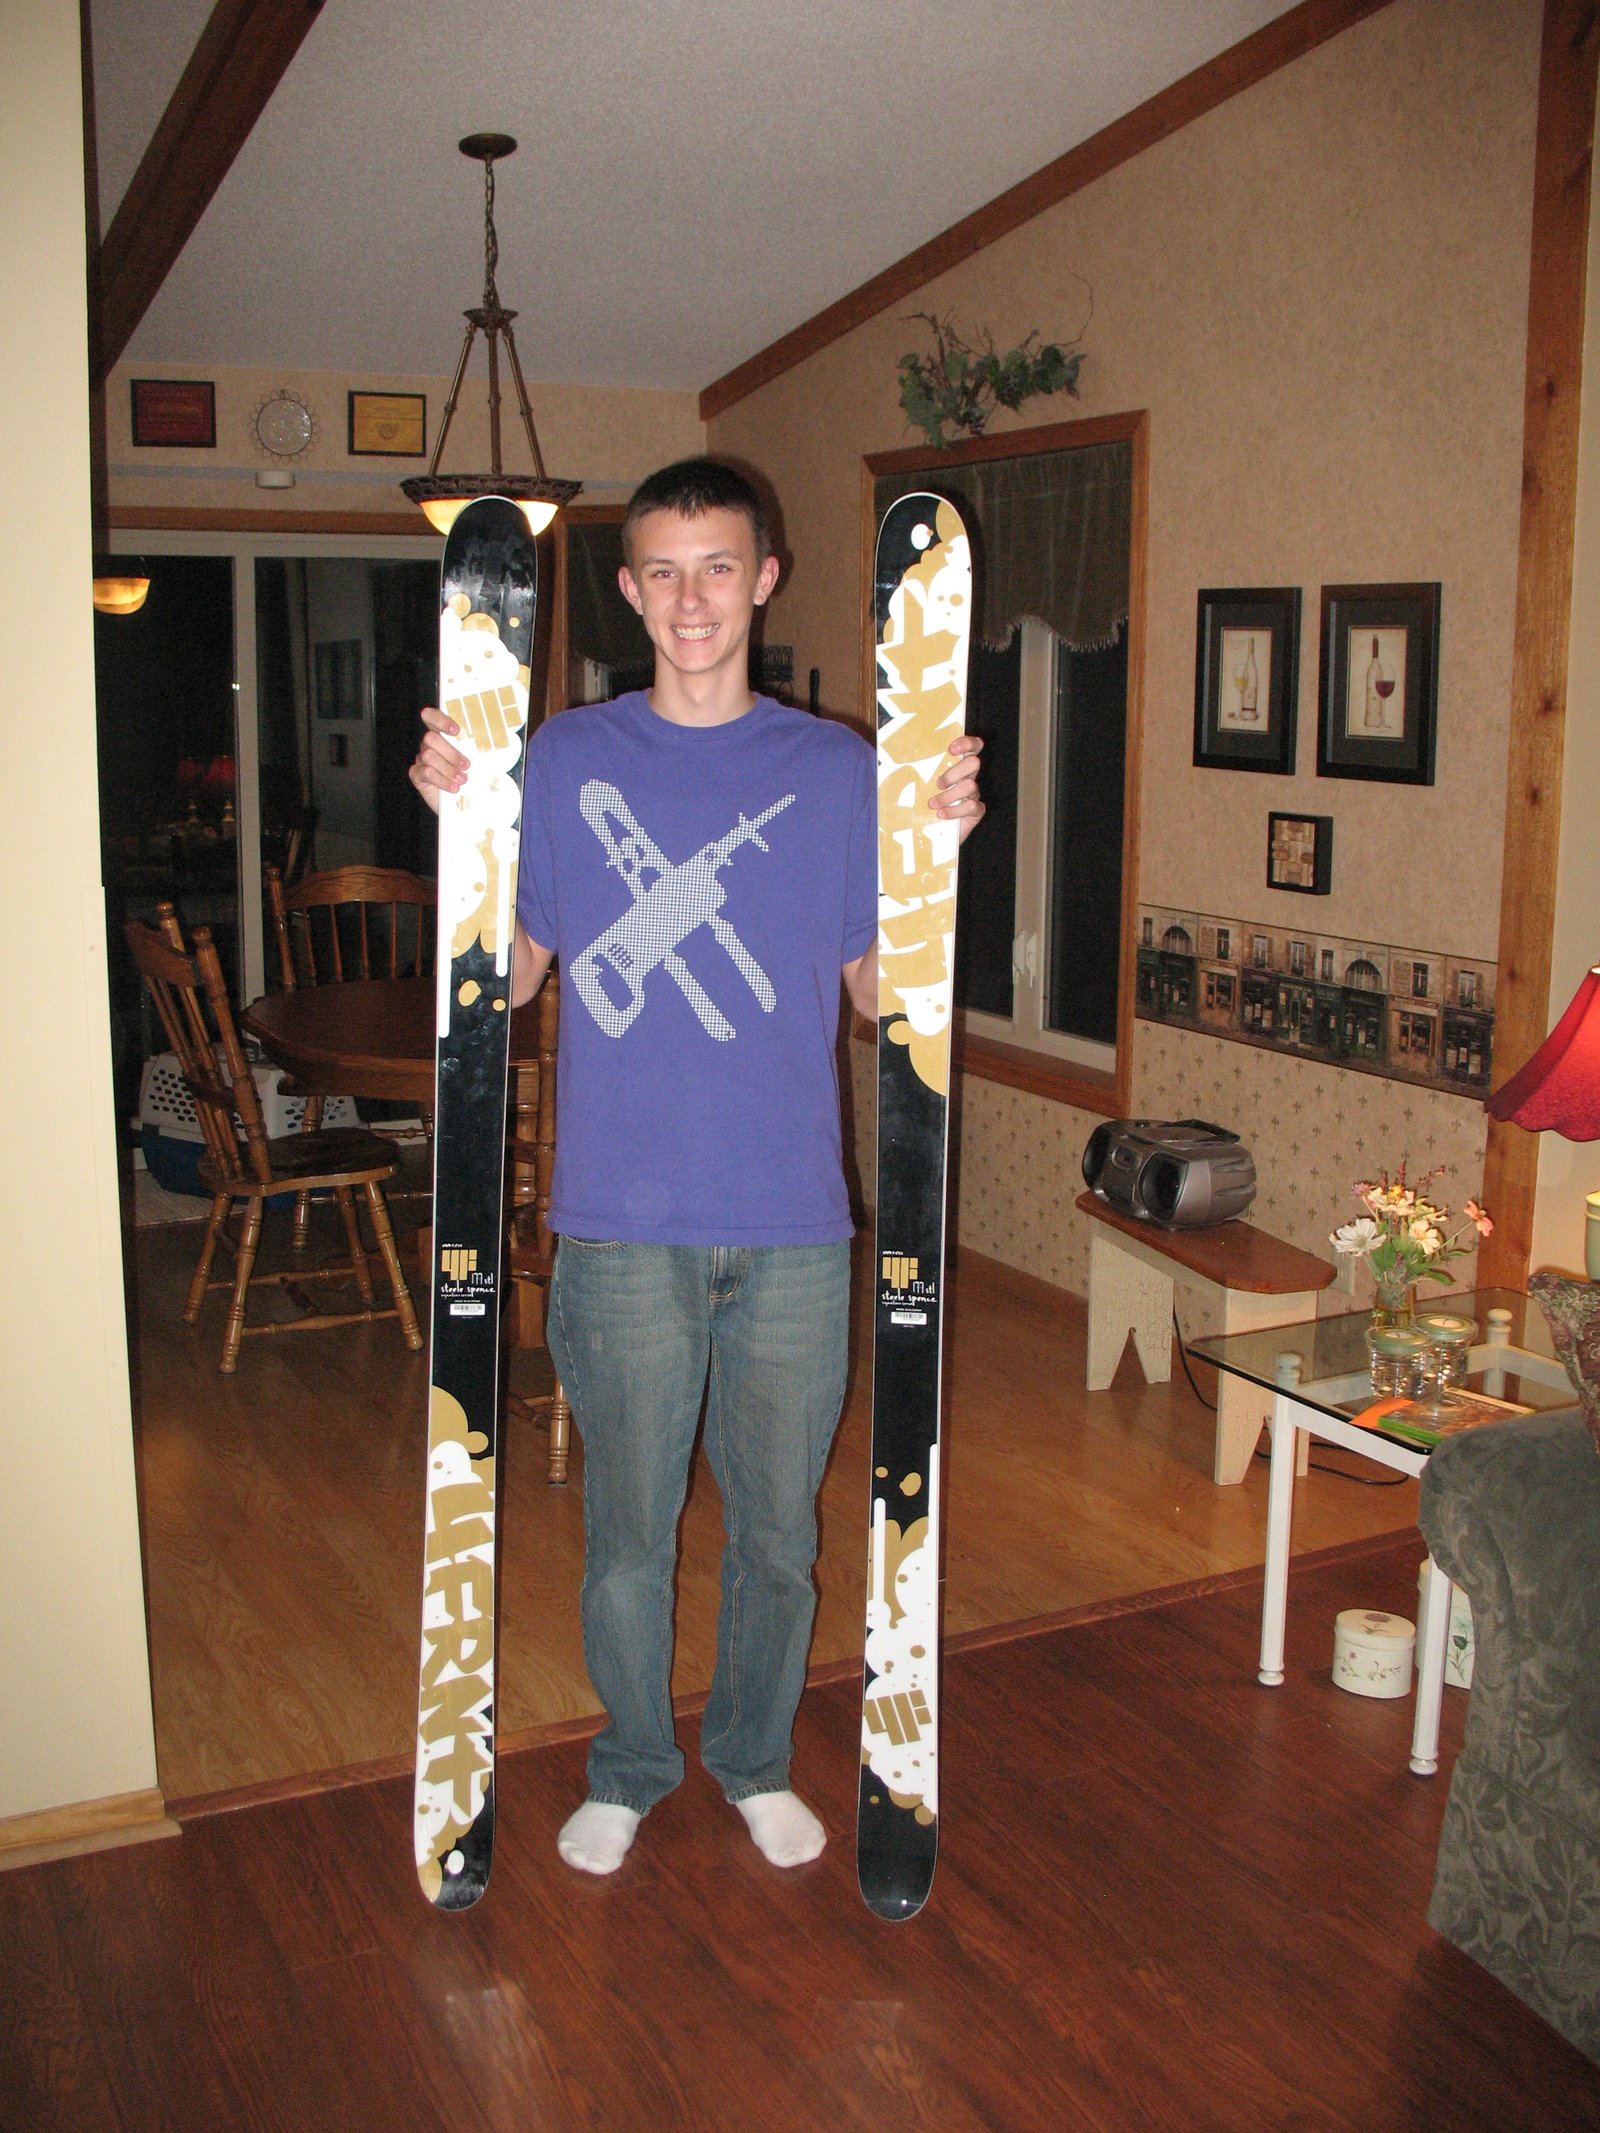 Skis for my b-day